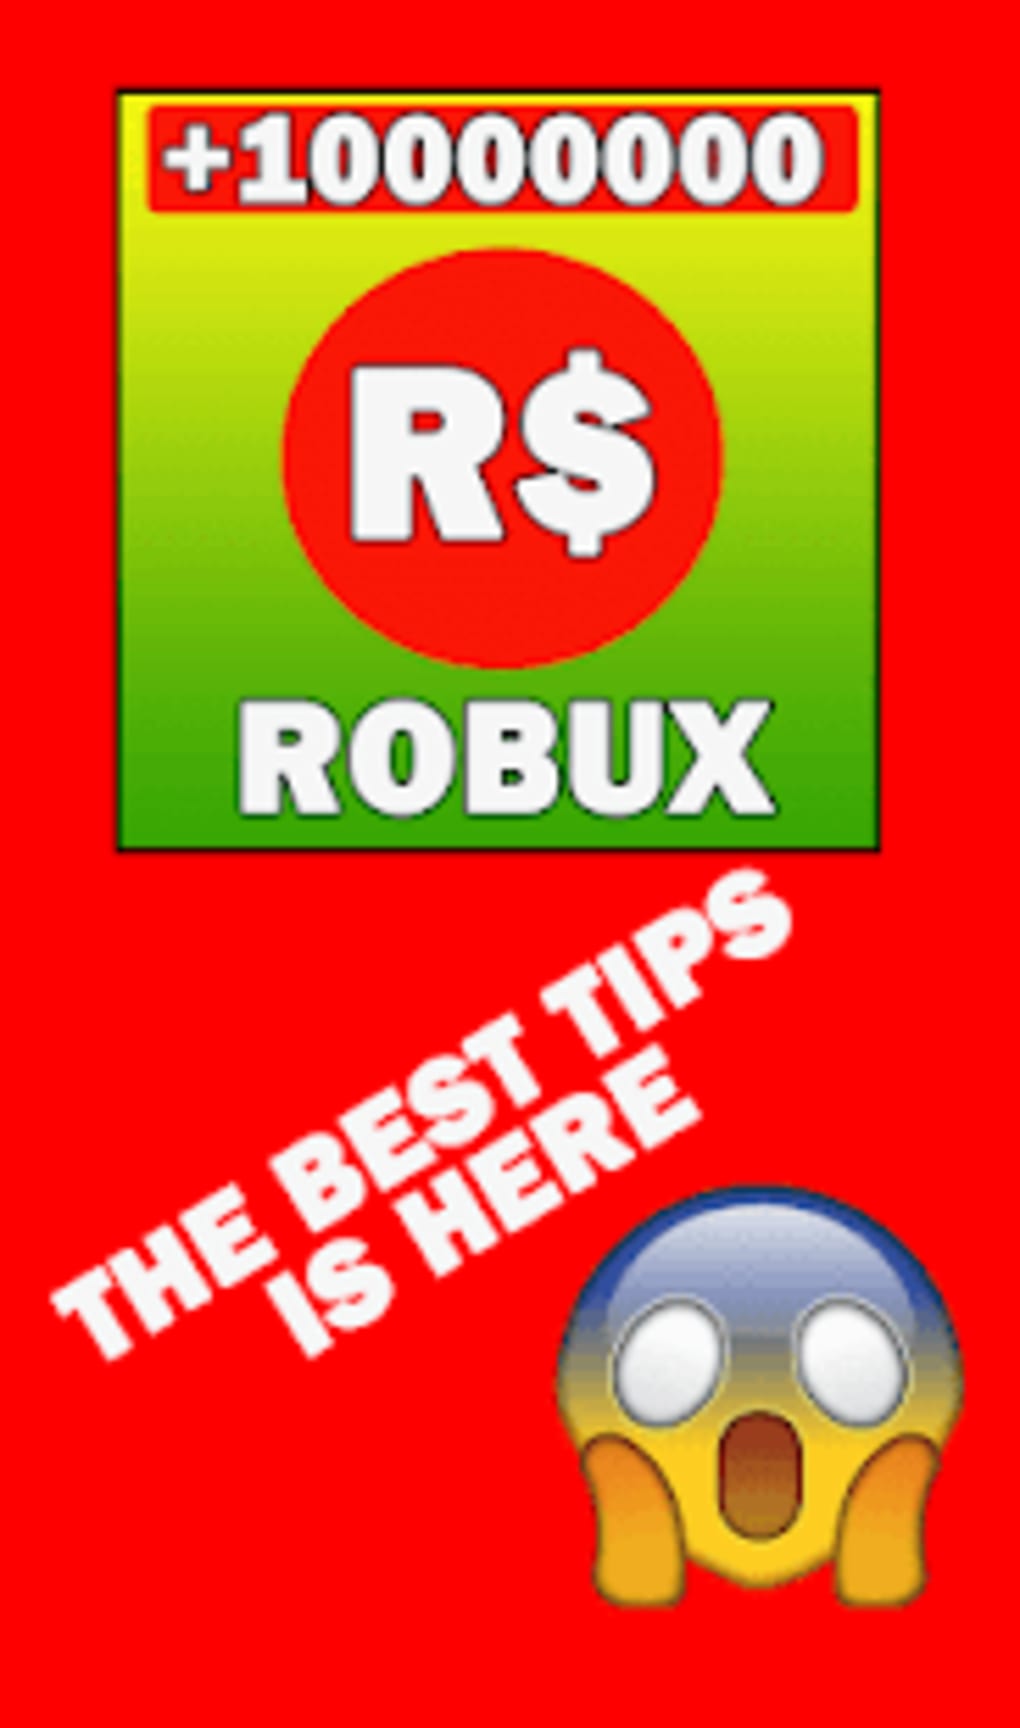 Get Free Robux Tips Get Robux Free 2k19 Para Android - convert robux to real money